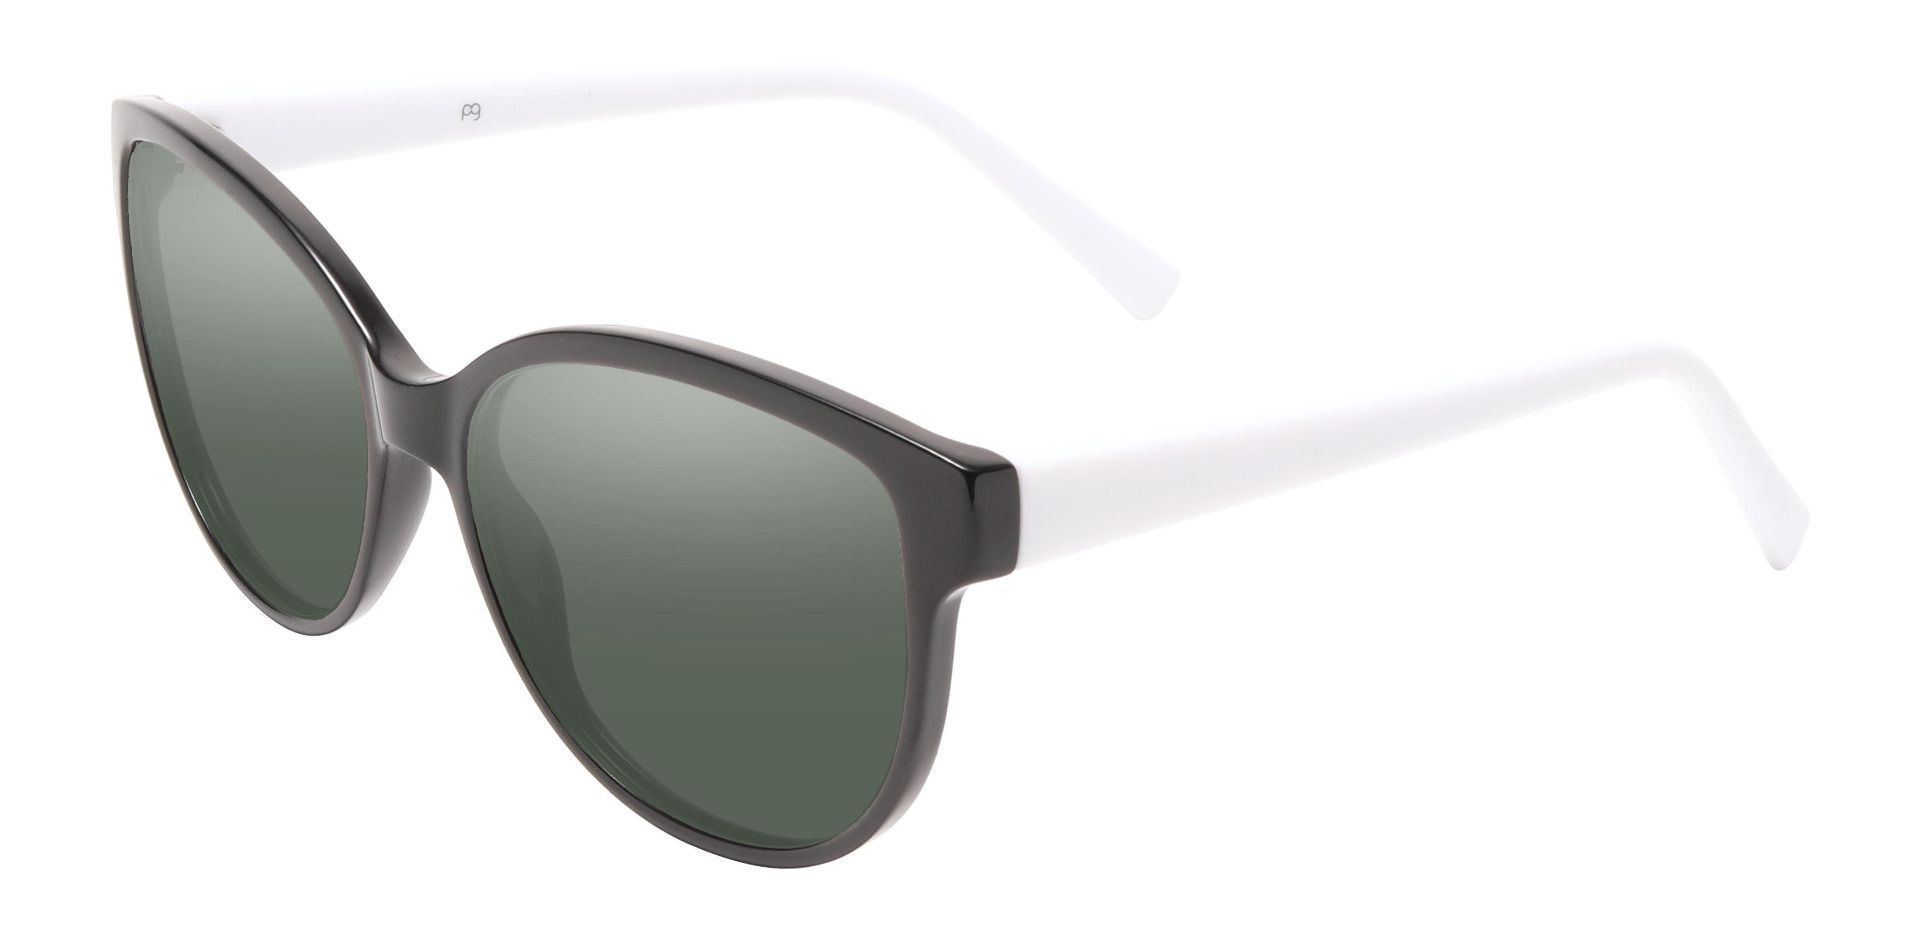 Rabia Oval Lined Bifocal Sunglasses - Black Frame With Green Lenses